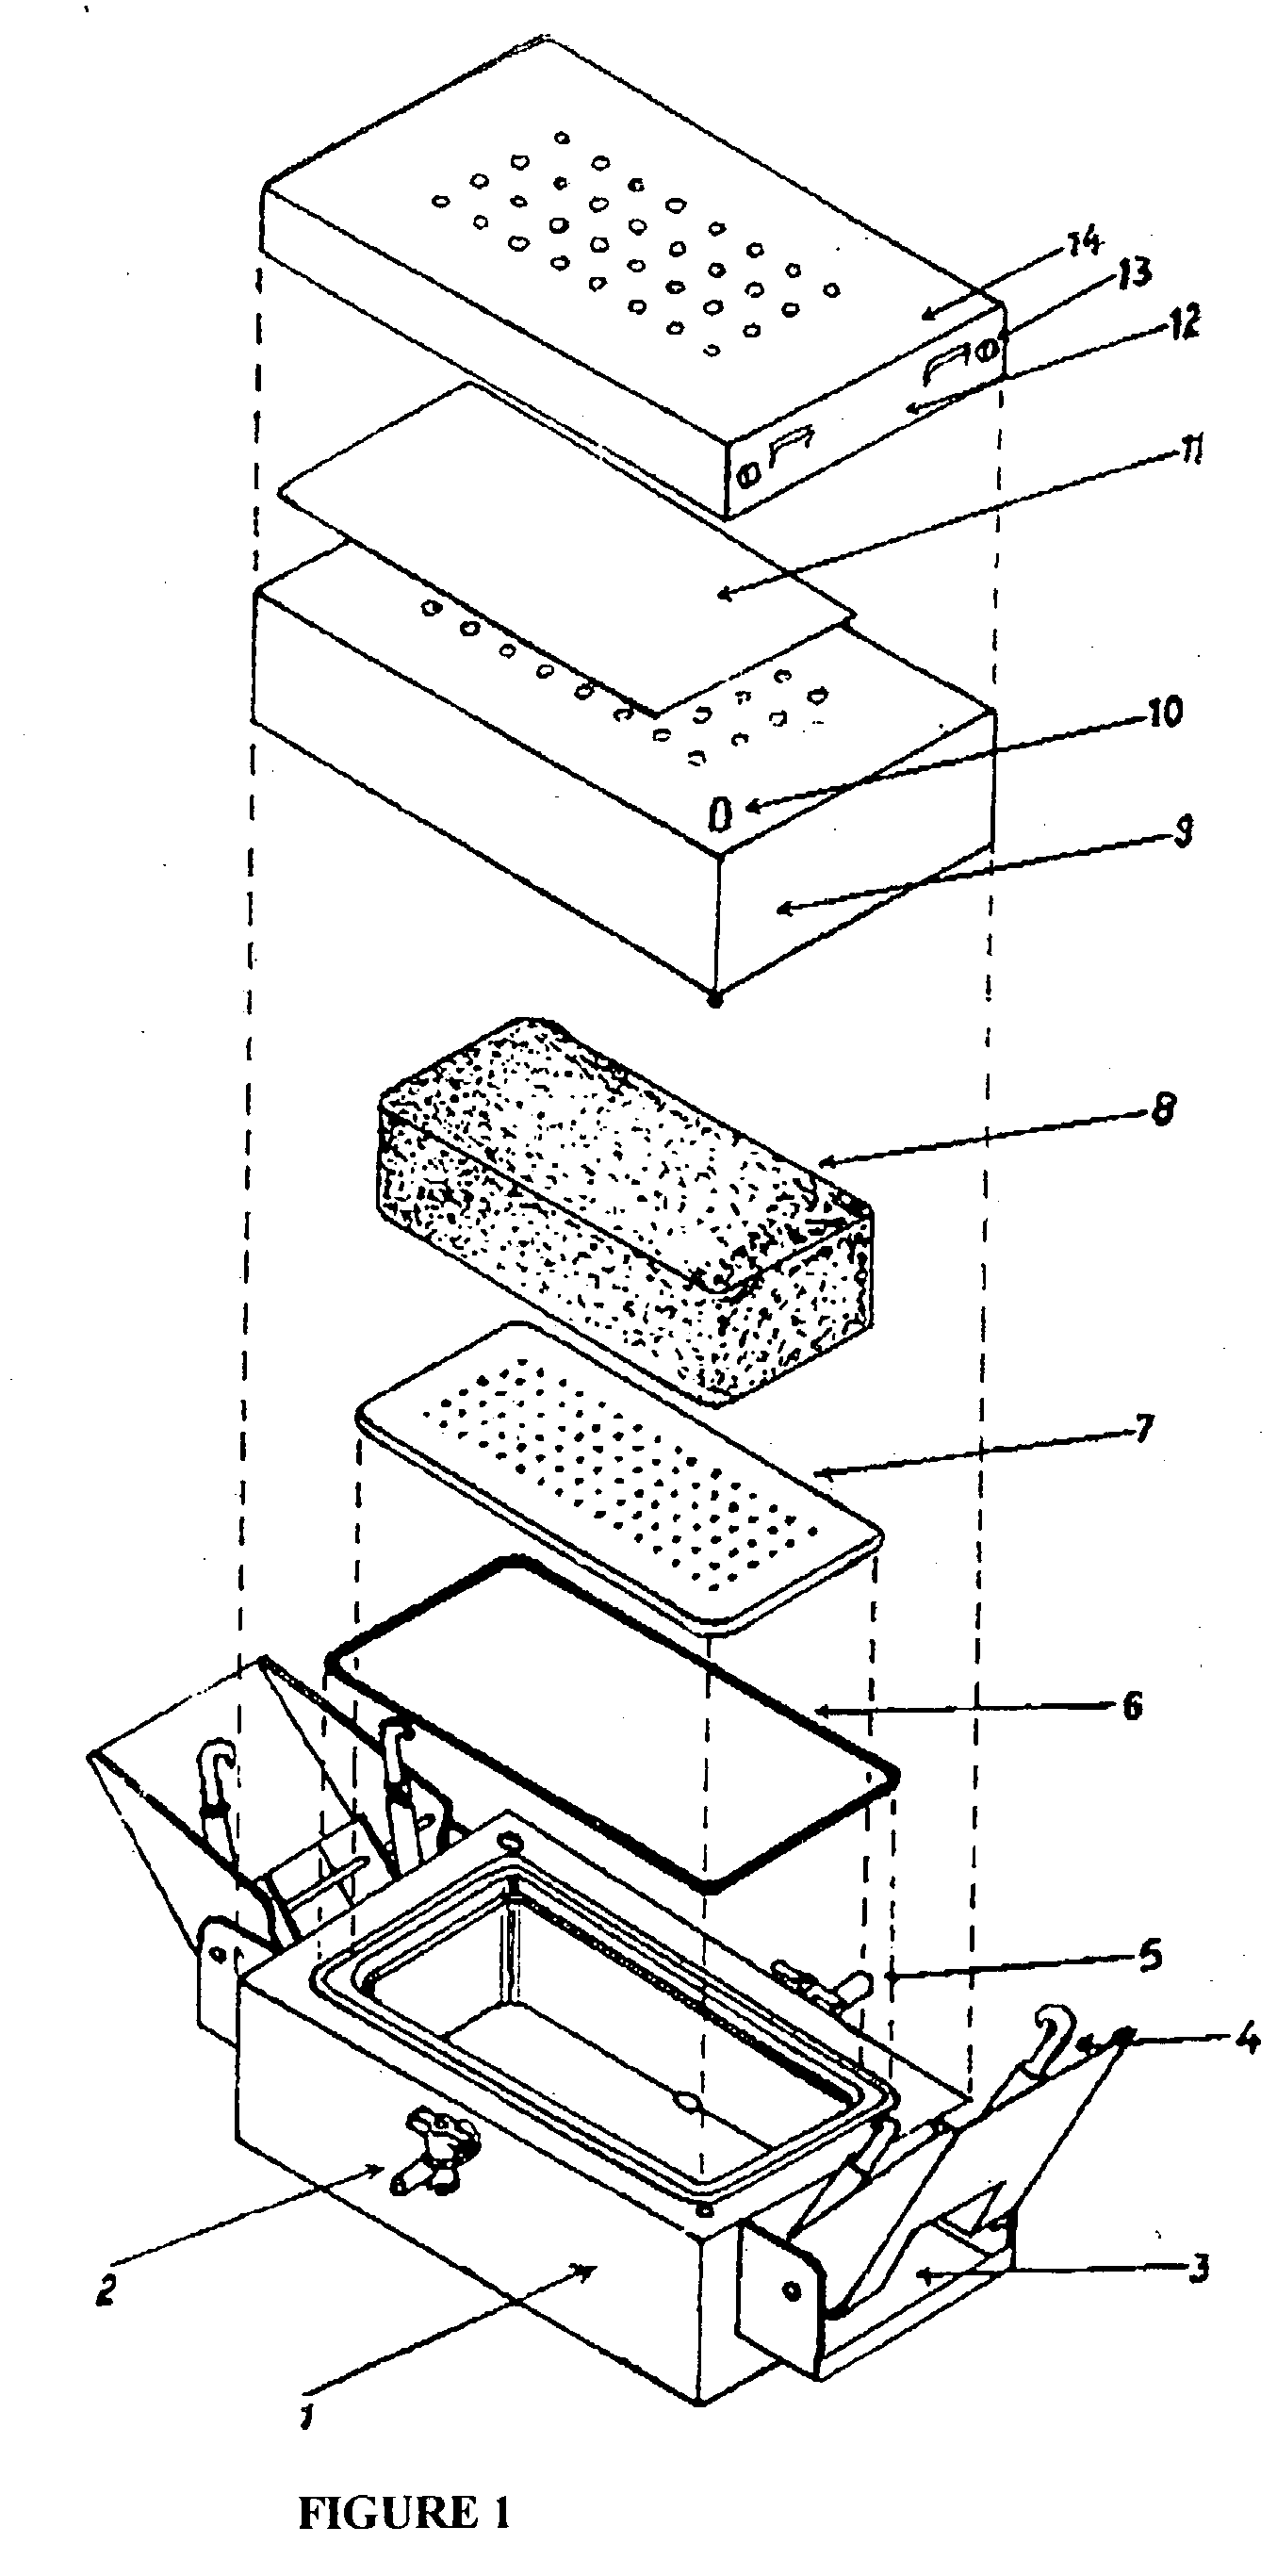 Microporous filtration based dot immunoassay device for method for screening of analytes and method of use